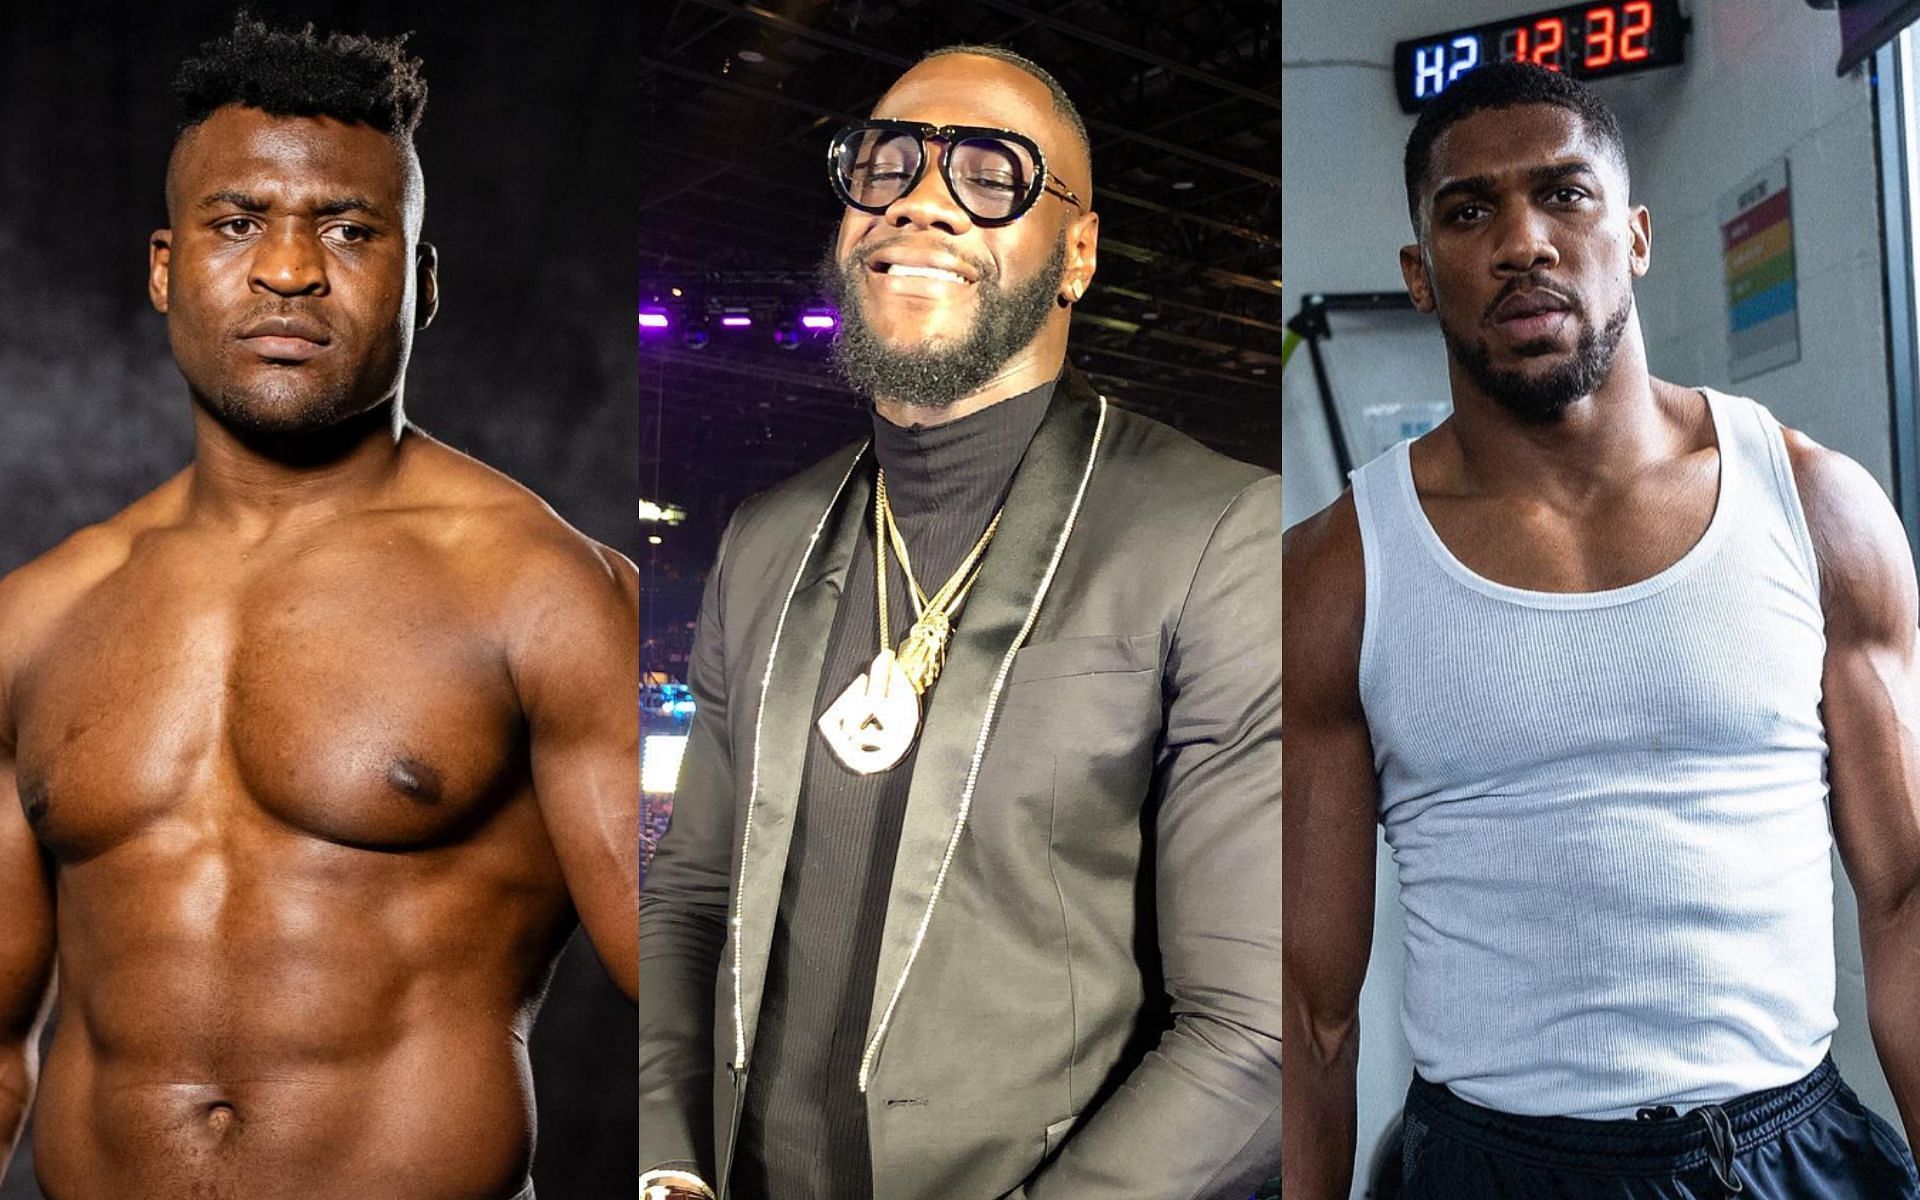 Deontay Wilder [middle] potentially fights on Francis Ngannou [left] vs. Anthony Joshua [right] undercard [Image via: @francisngannou, @anthonyjoshua and @bronzebomber on Instagram] 